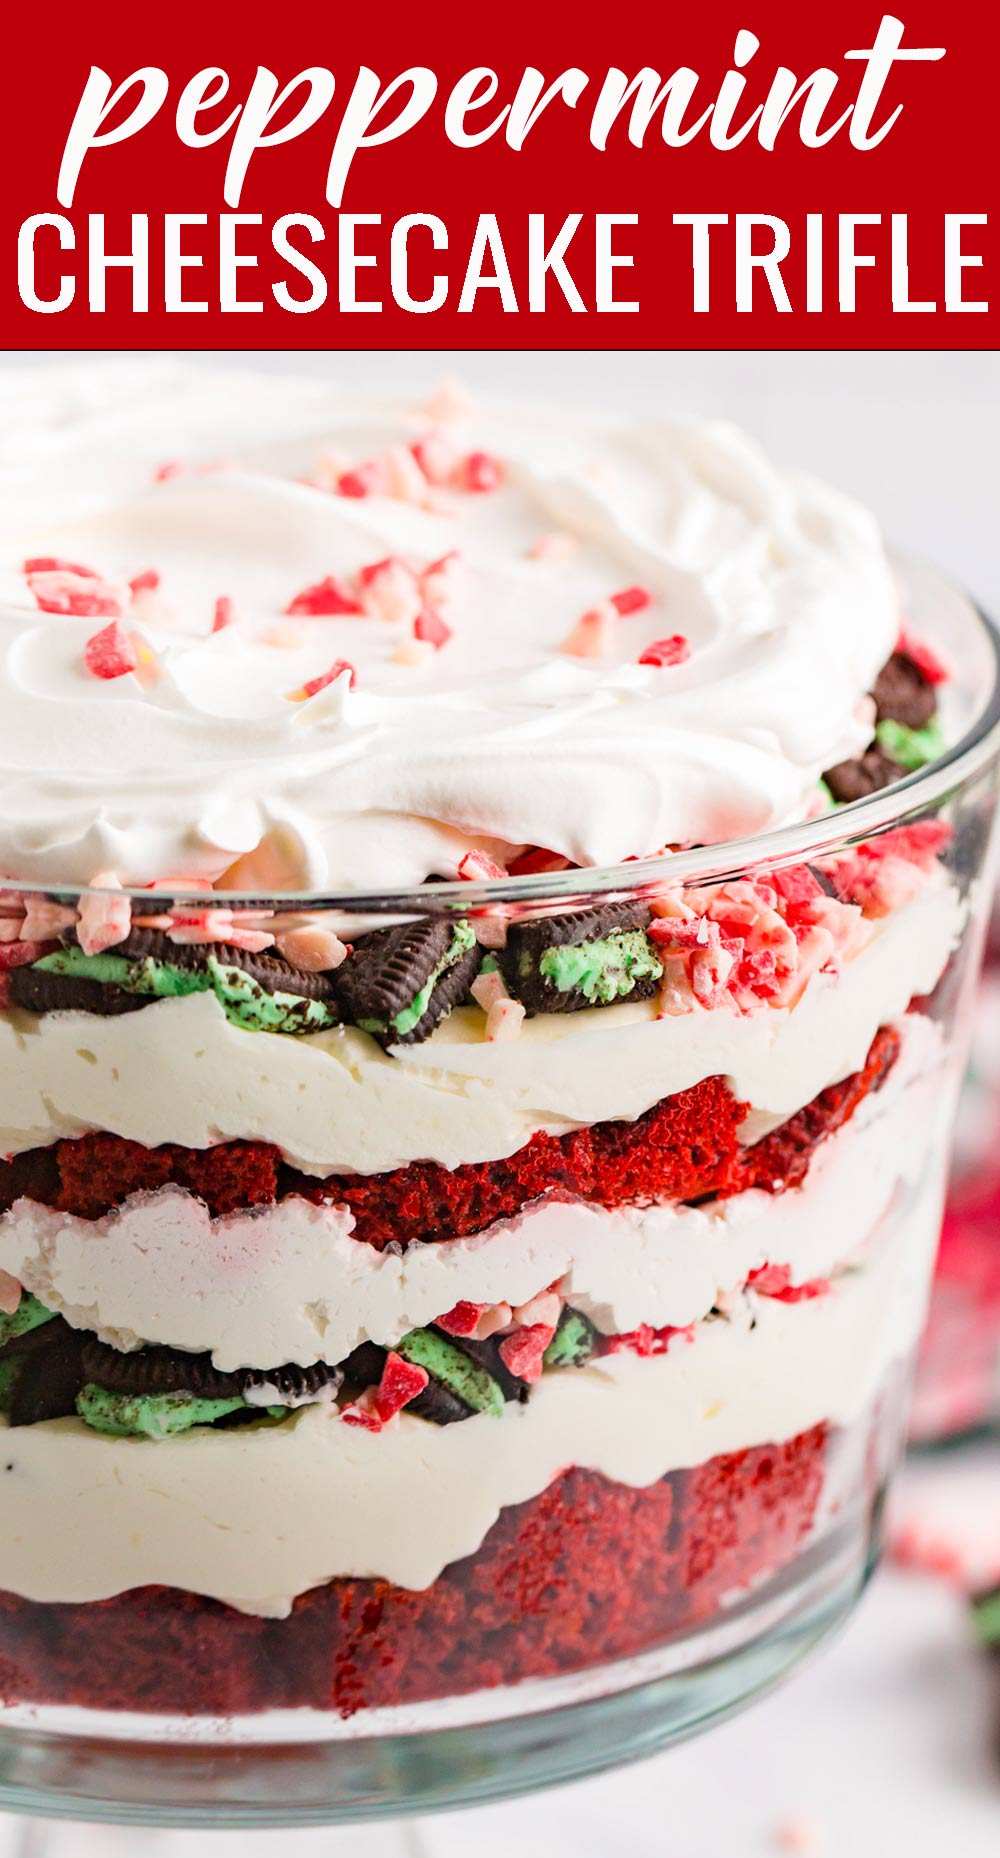 Red velvet cake layered with peppermint cream cheese filling, mint Oreos, Cool Whip and peppermint crunch candies fills this peppermint cheesecake trifle. This festive, layered, holiday dessert will serve (and wow!) a crowd. via @tastesoflizzyt